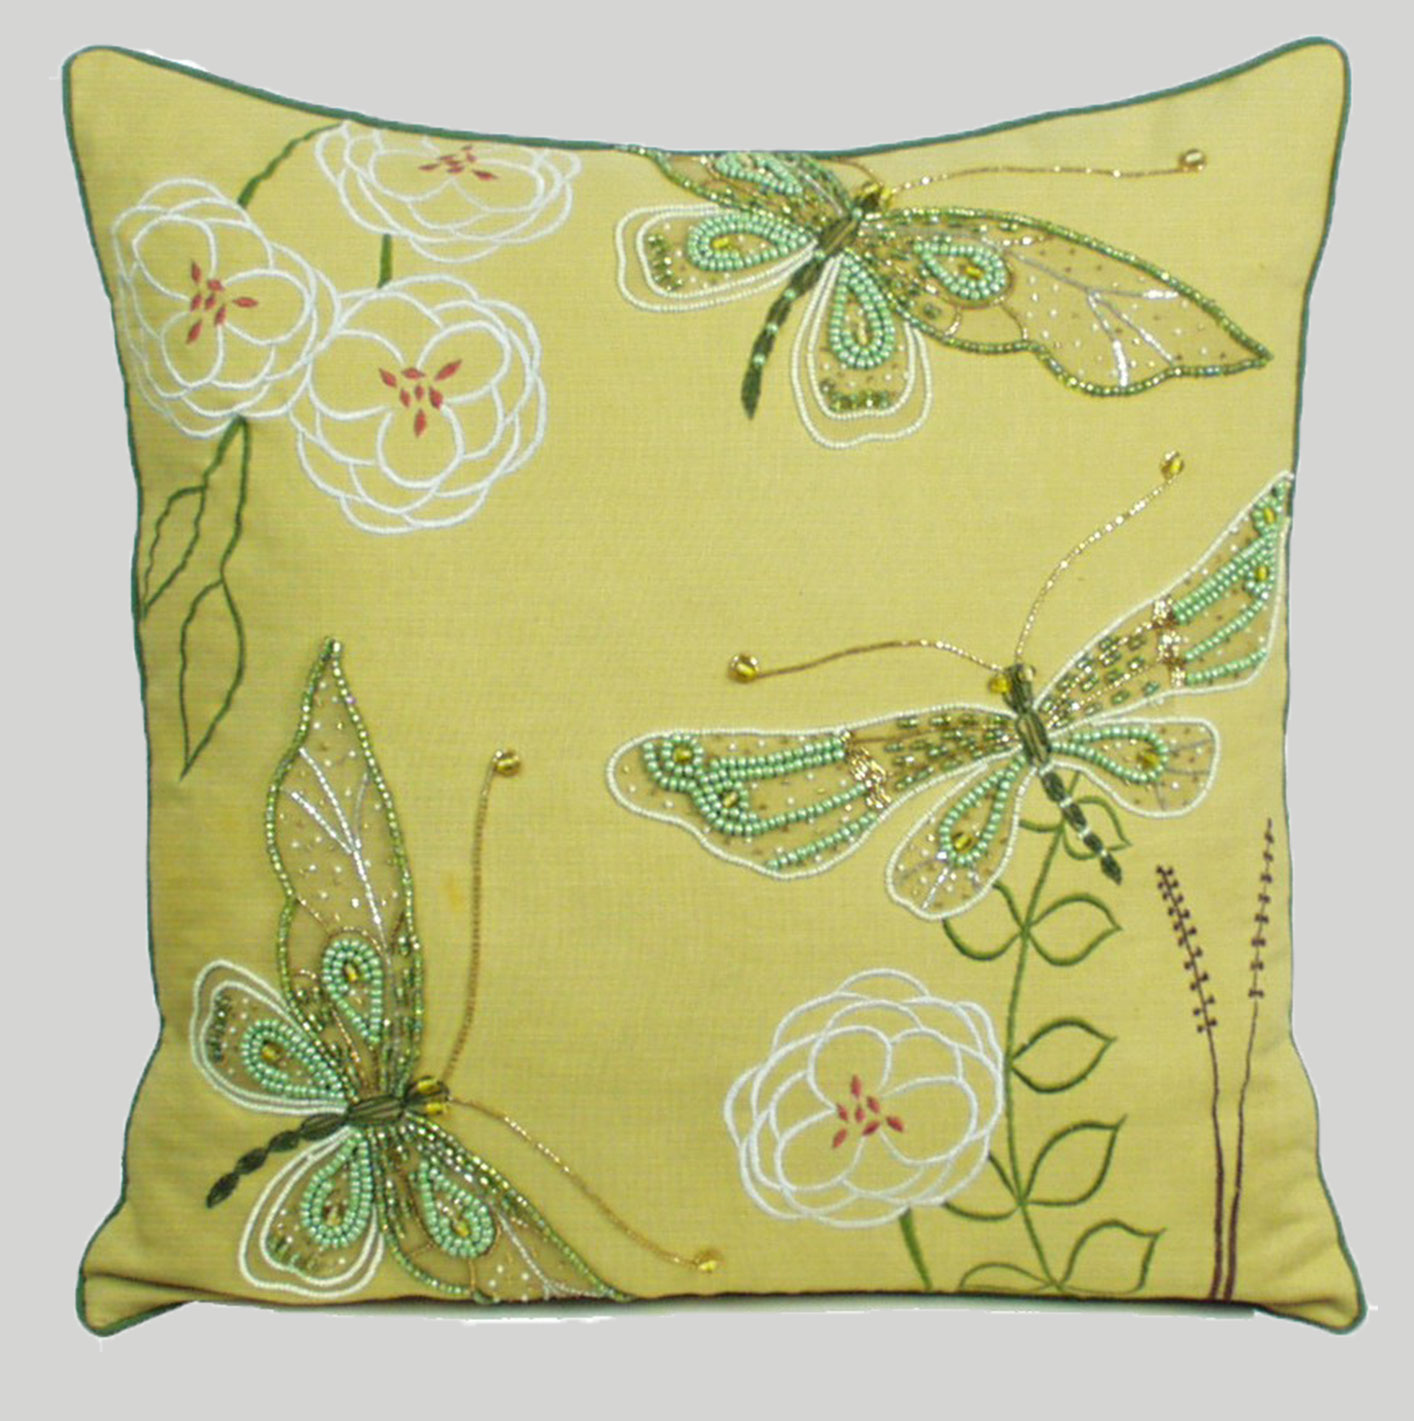 Anthropologie Butterfly Cushion Collection on Linen